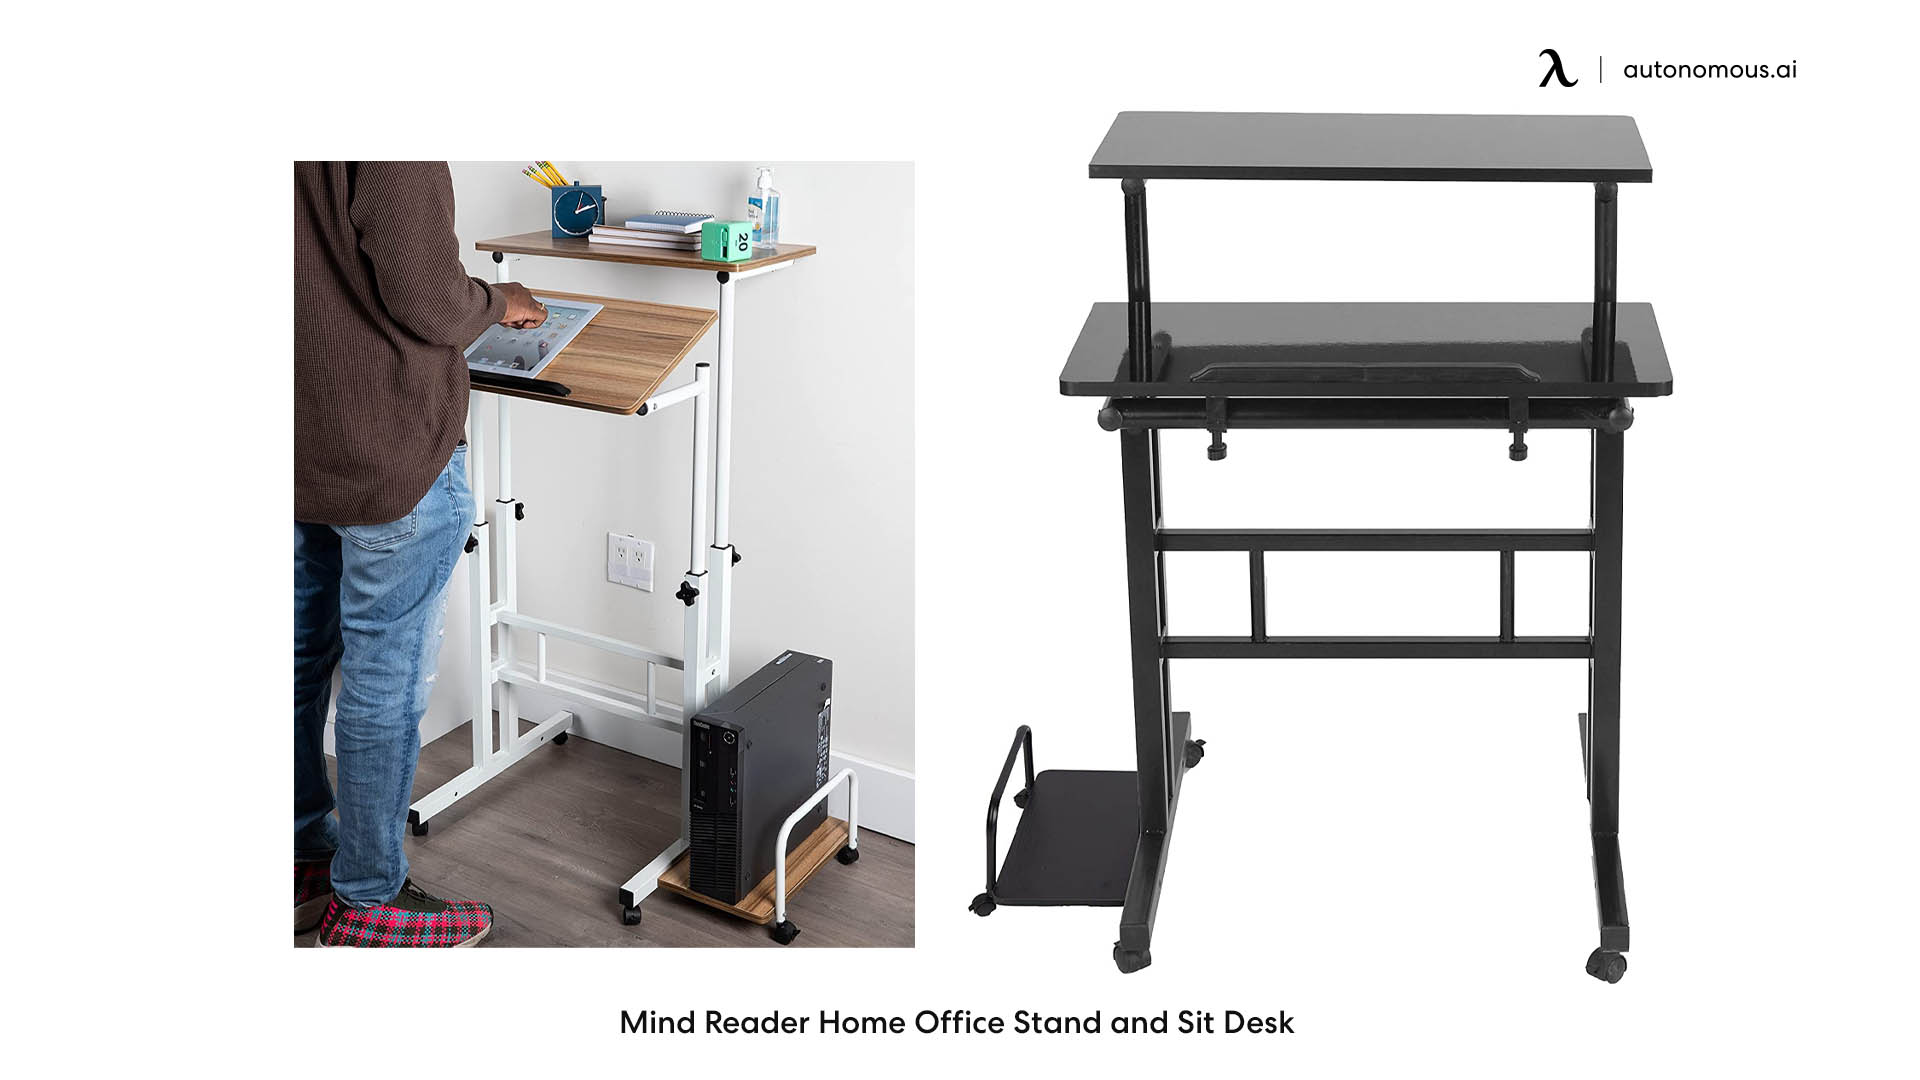 Mind Reader Home Office Stand and Sit Desk